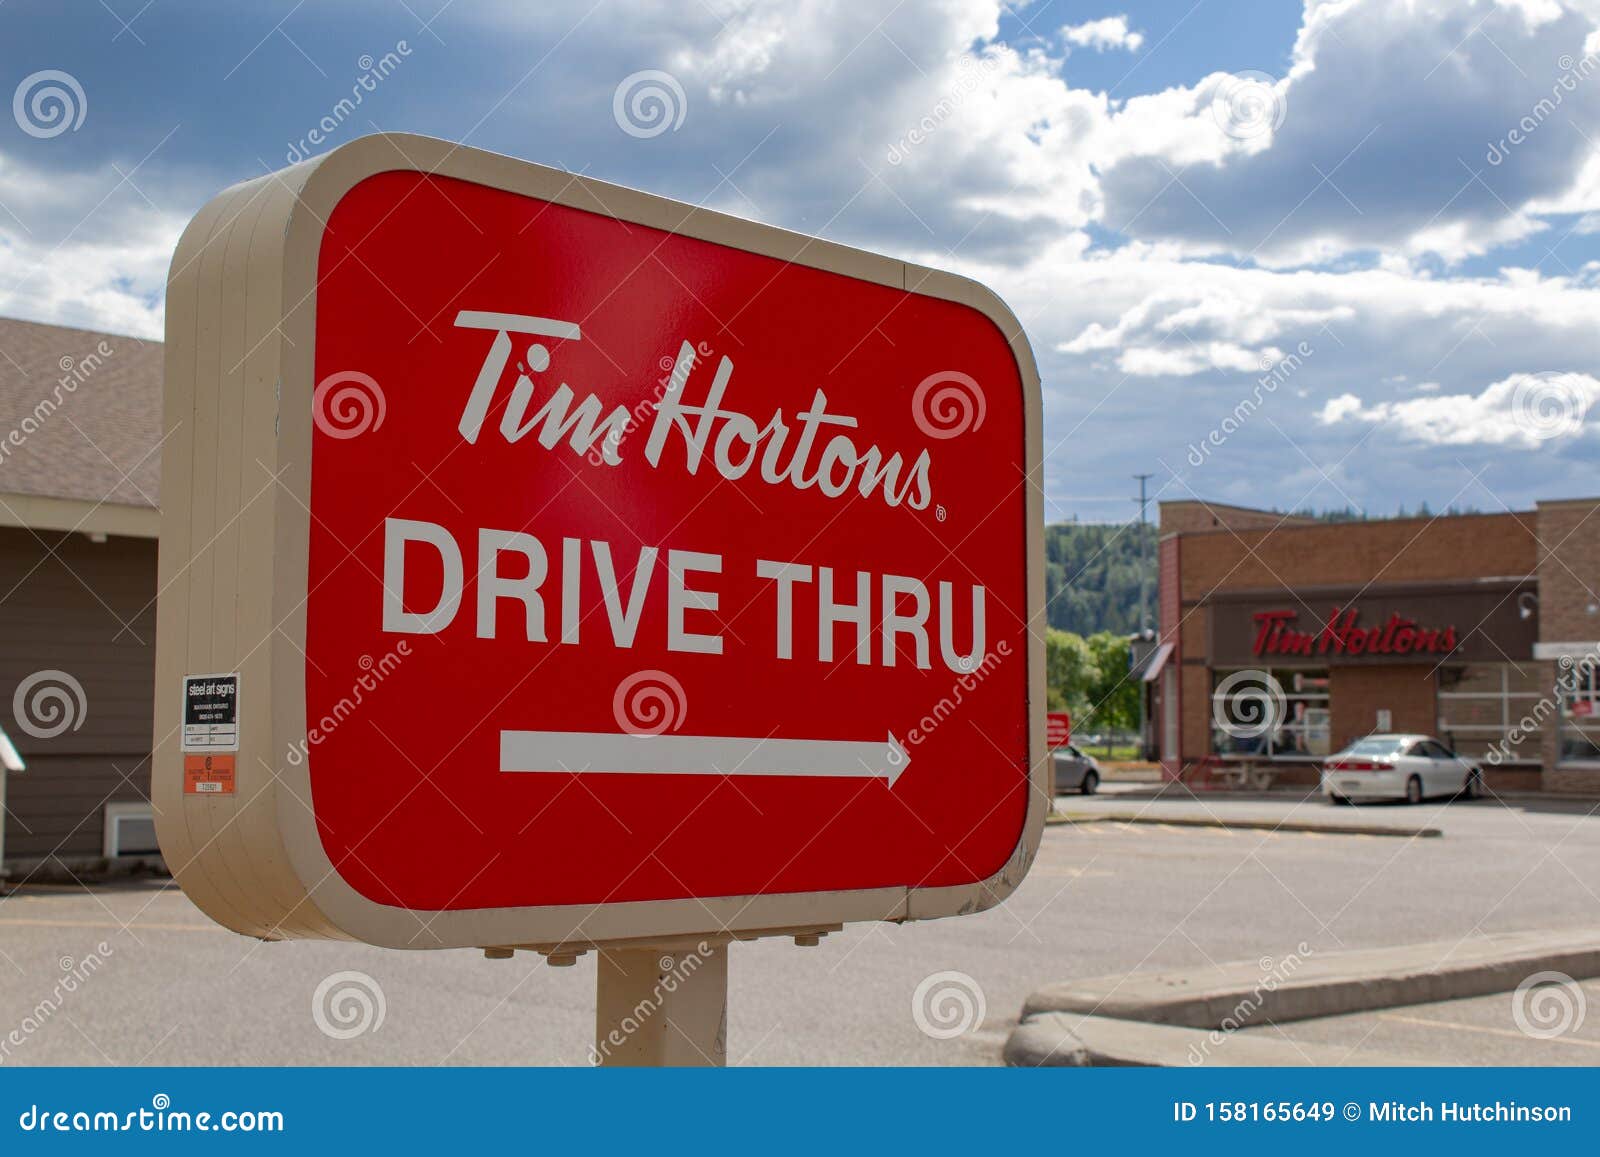 Tim Hortons Logo in Front of One of Their Restaurants in Quebec